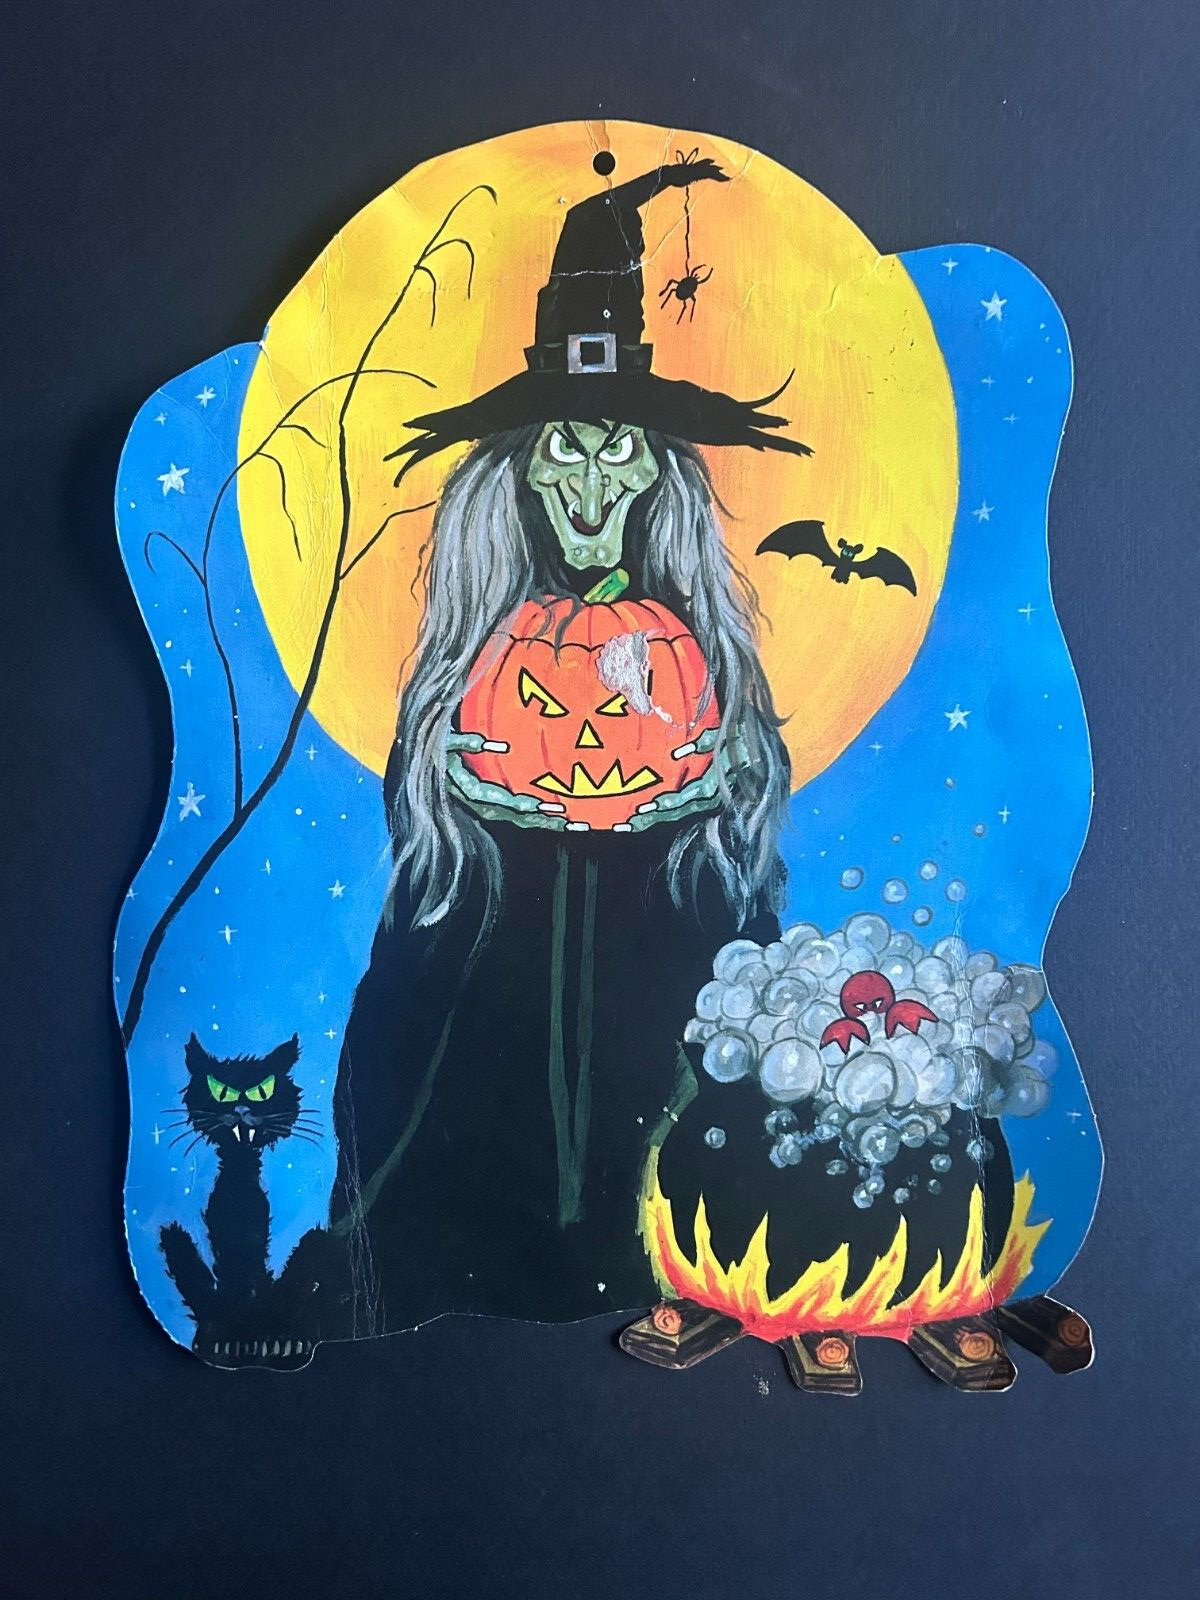 Vintage Halloween Decoration: The Witch Cooking by Moonlight